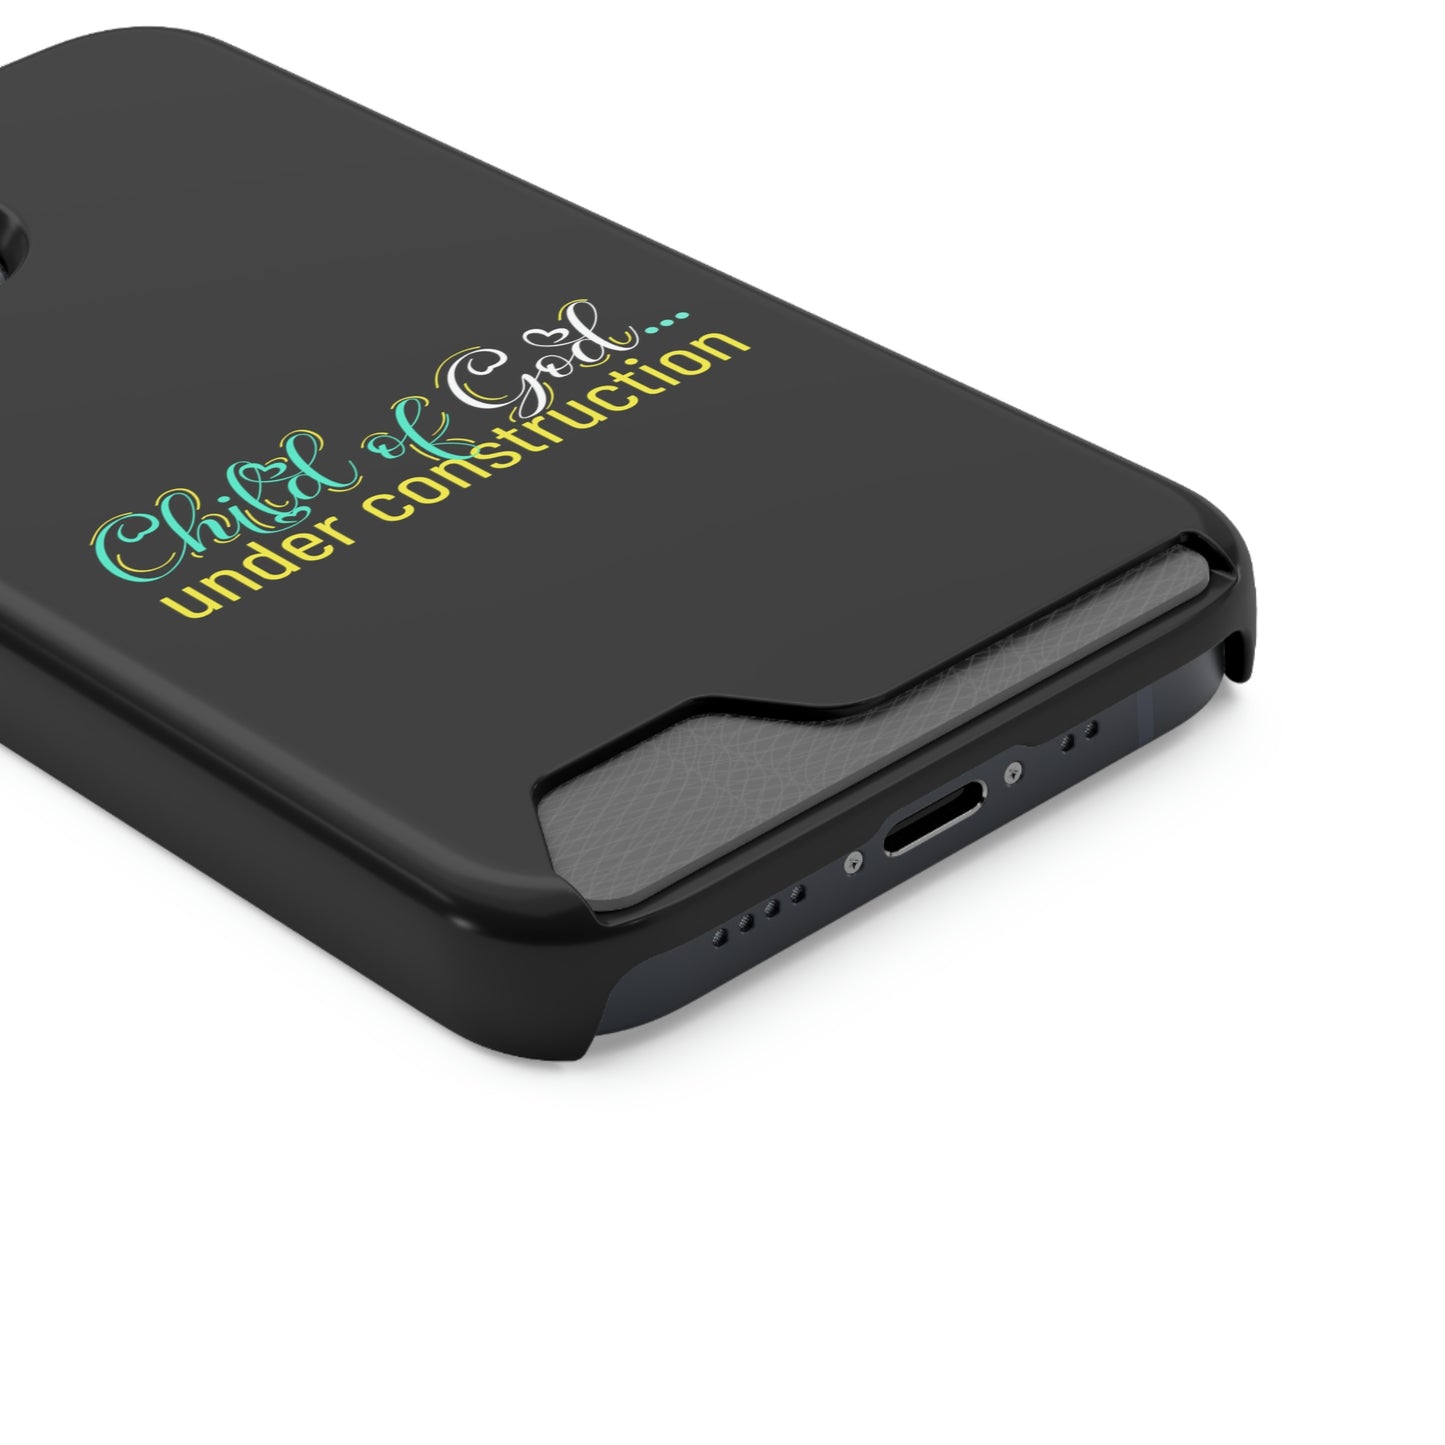 Child Of God Under Construction Phone Case With Card Holder